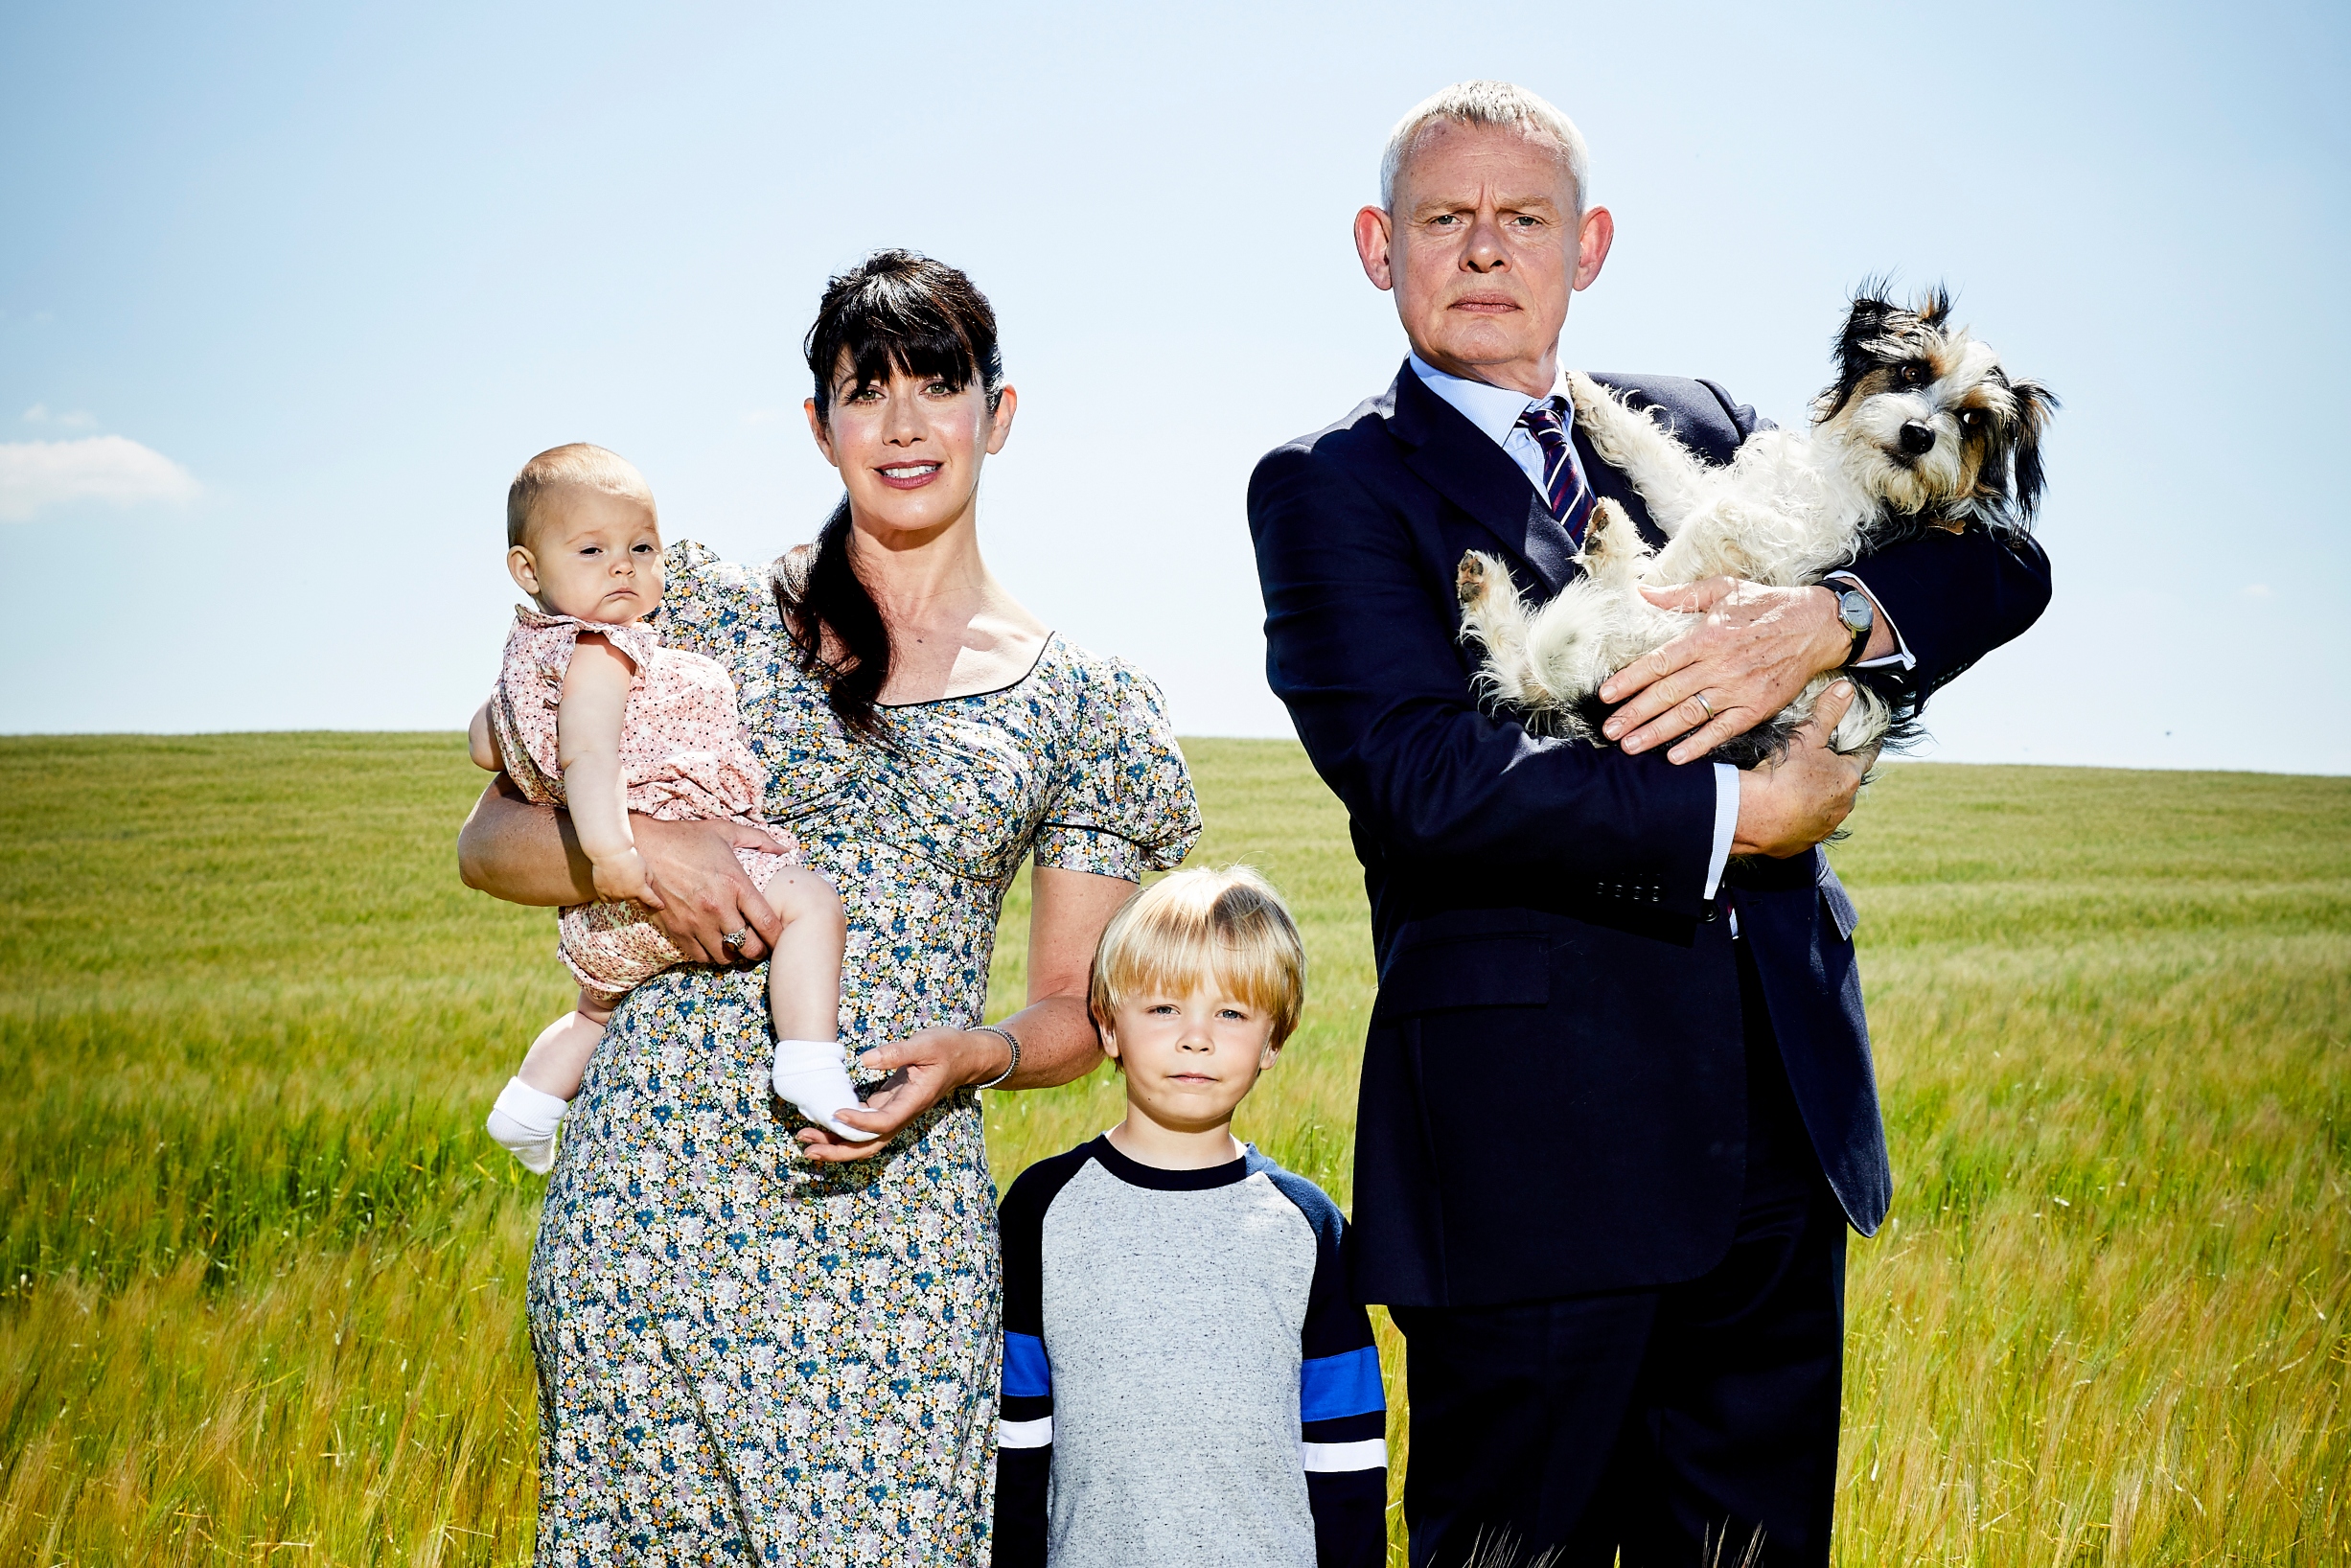 Doc Martin with wife Louisa, son James Henry, daughter Mary Elizabeth, and Chicken the dog.